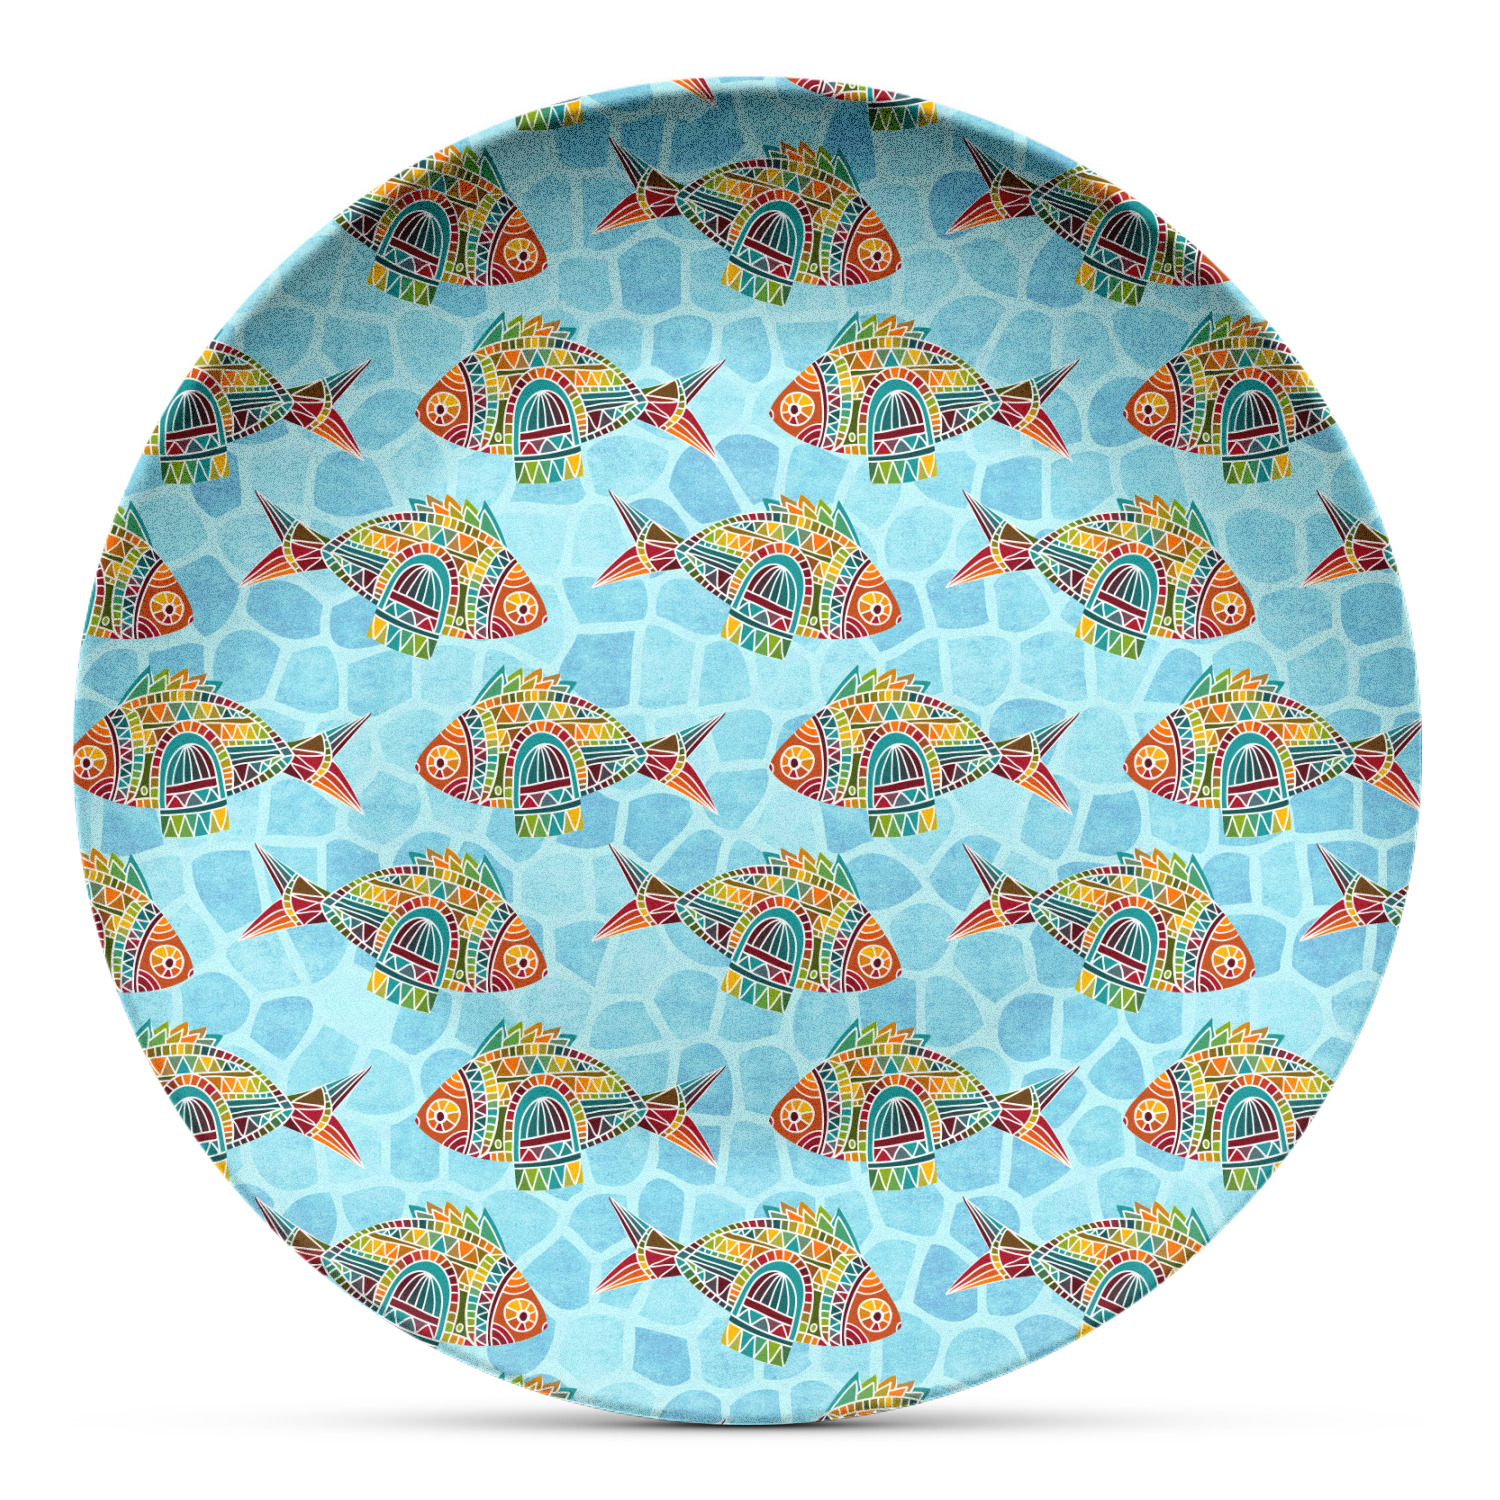 https://www.youcustomizeit.com/common/MAKE/251619/Mosaic-Fish-DecoPlate-Oven-and-Microwave-Safe-Plate-Main-2.jpg?lm=1689966170